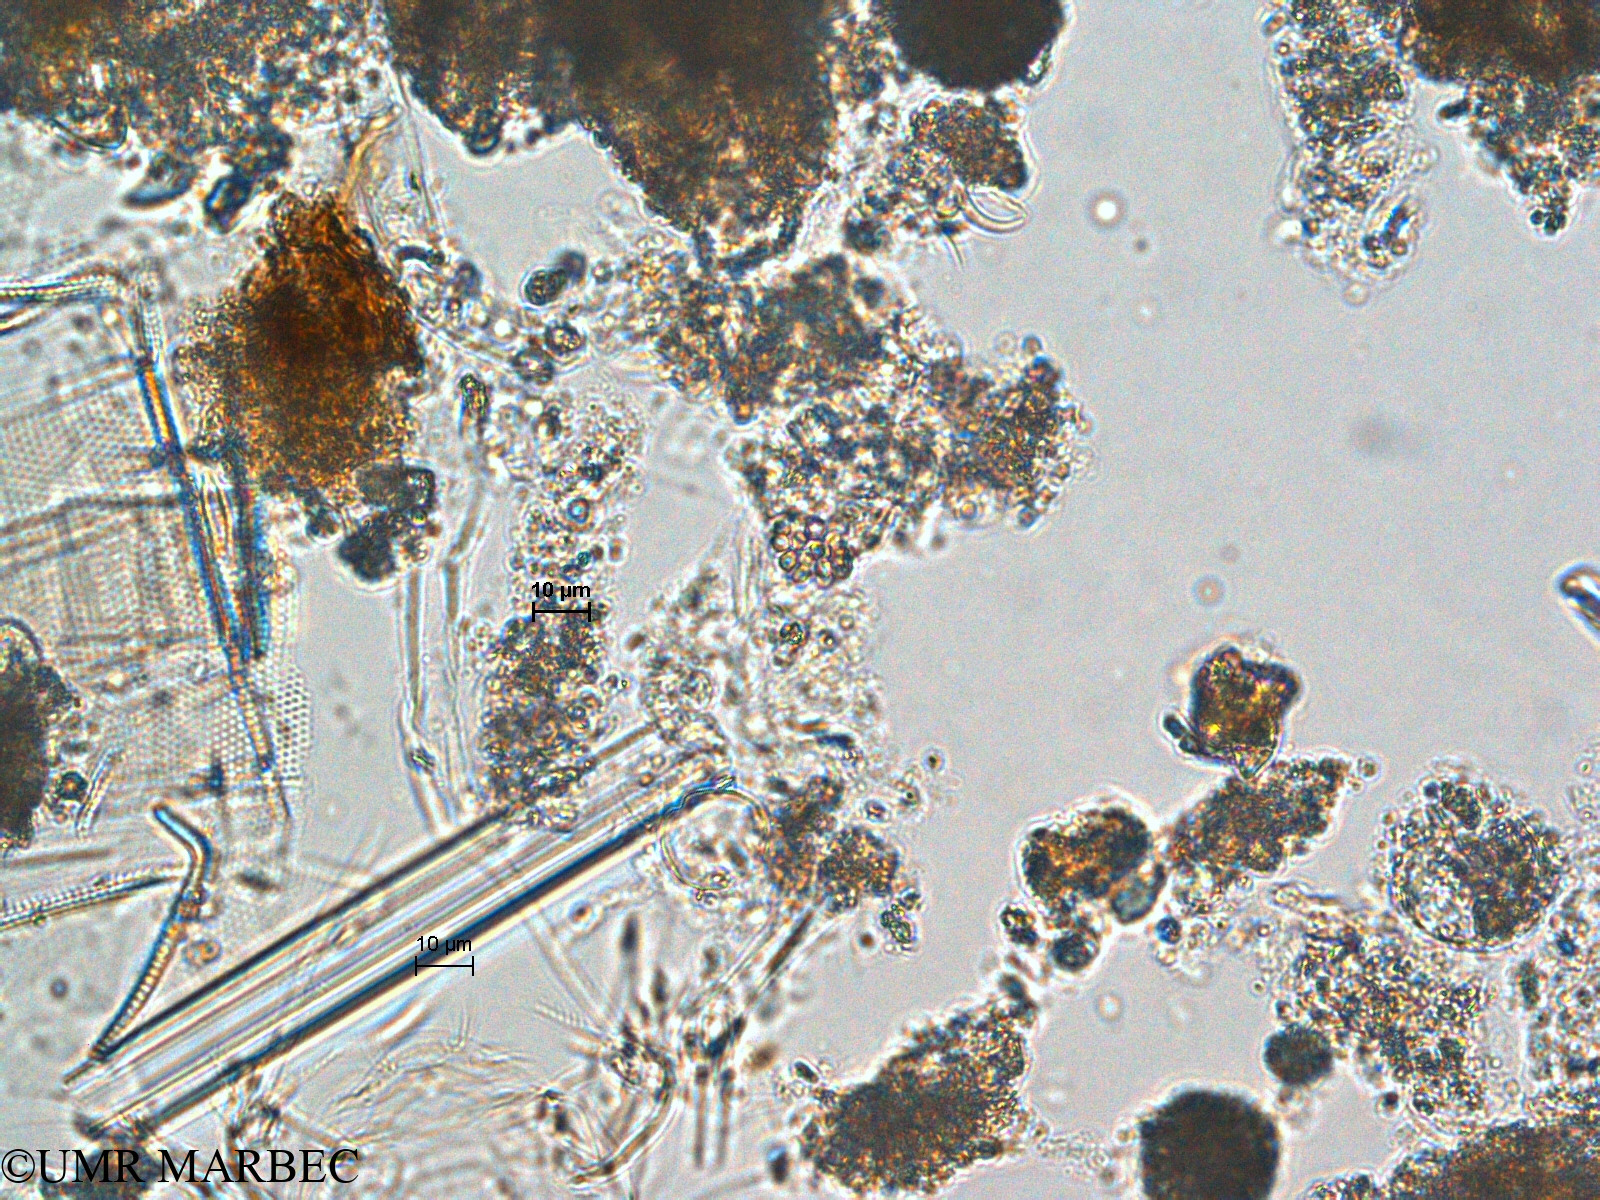 phyto/Scattered_Islands/europa/COMMA April 2011/Chroococcus sp5(copy).jpg